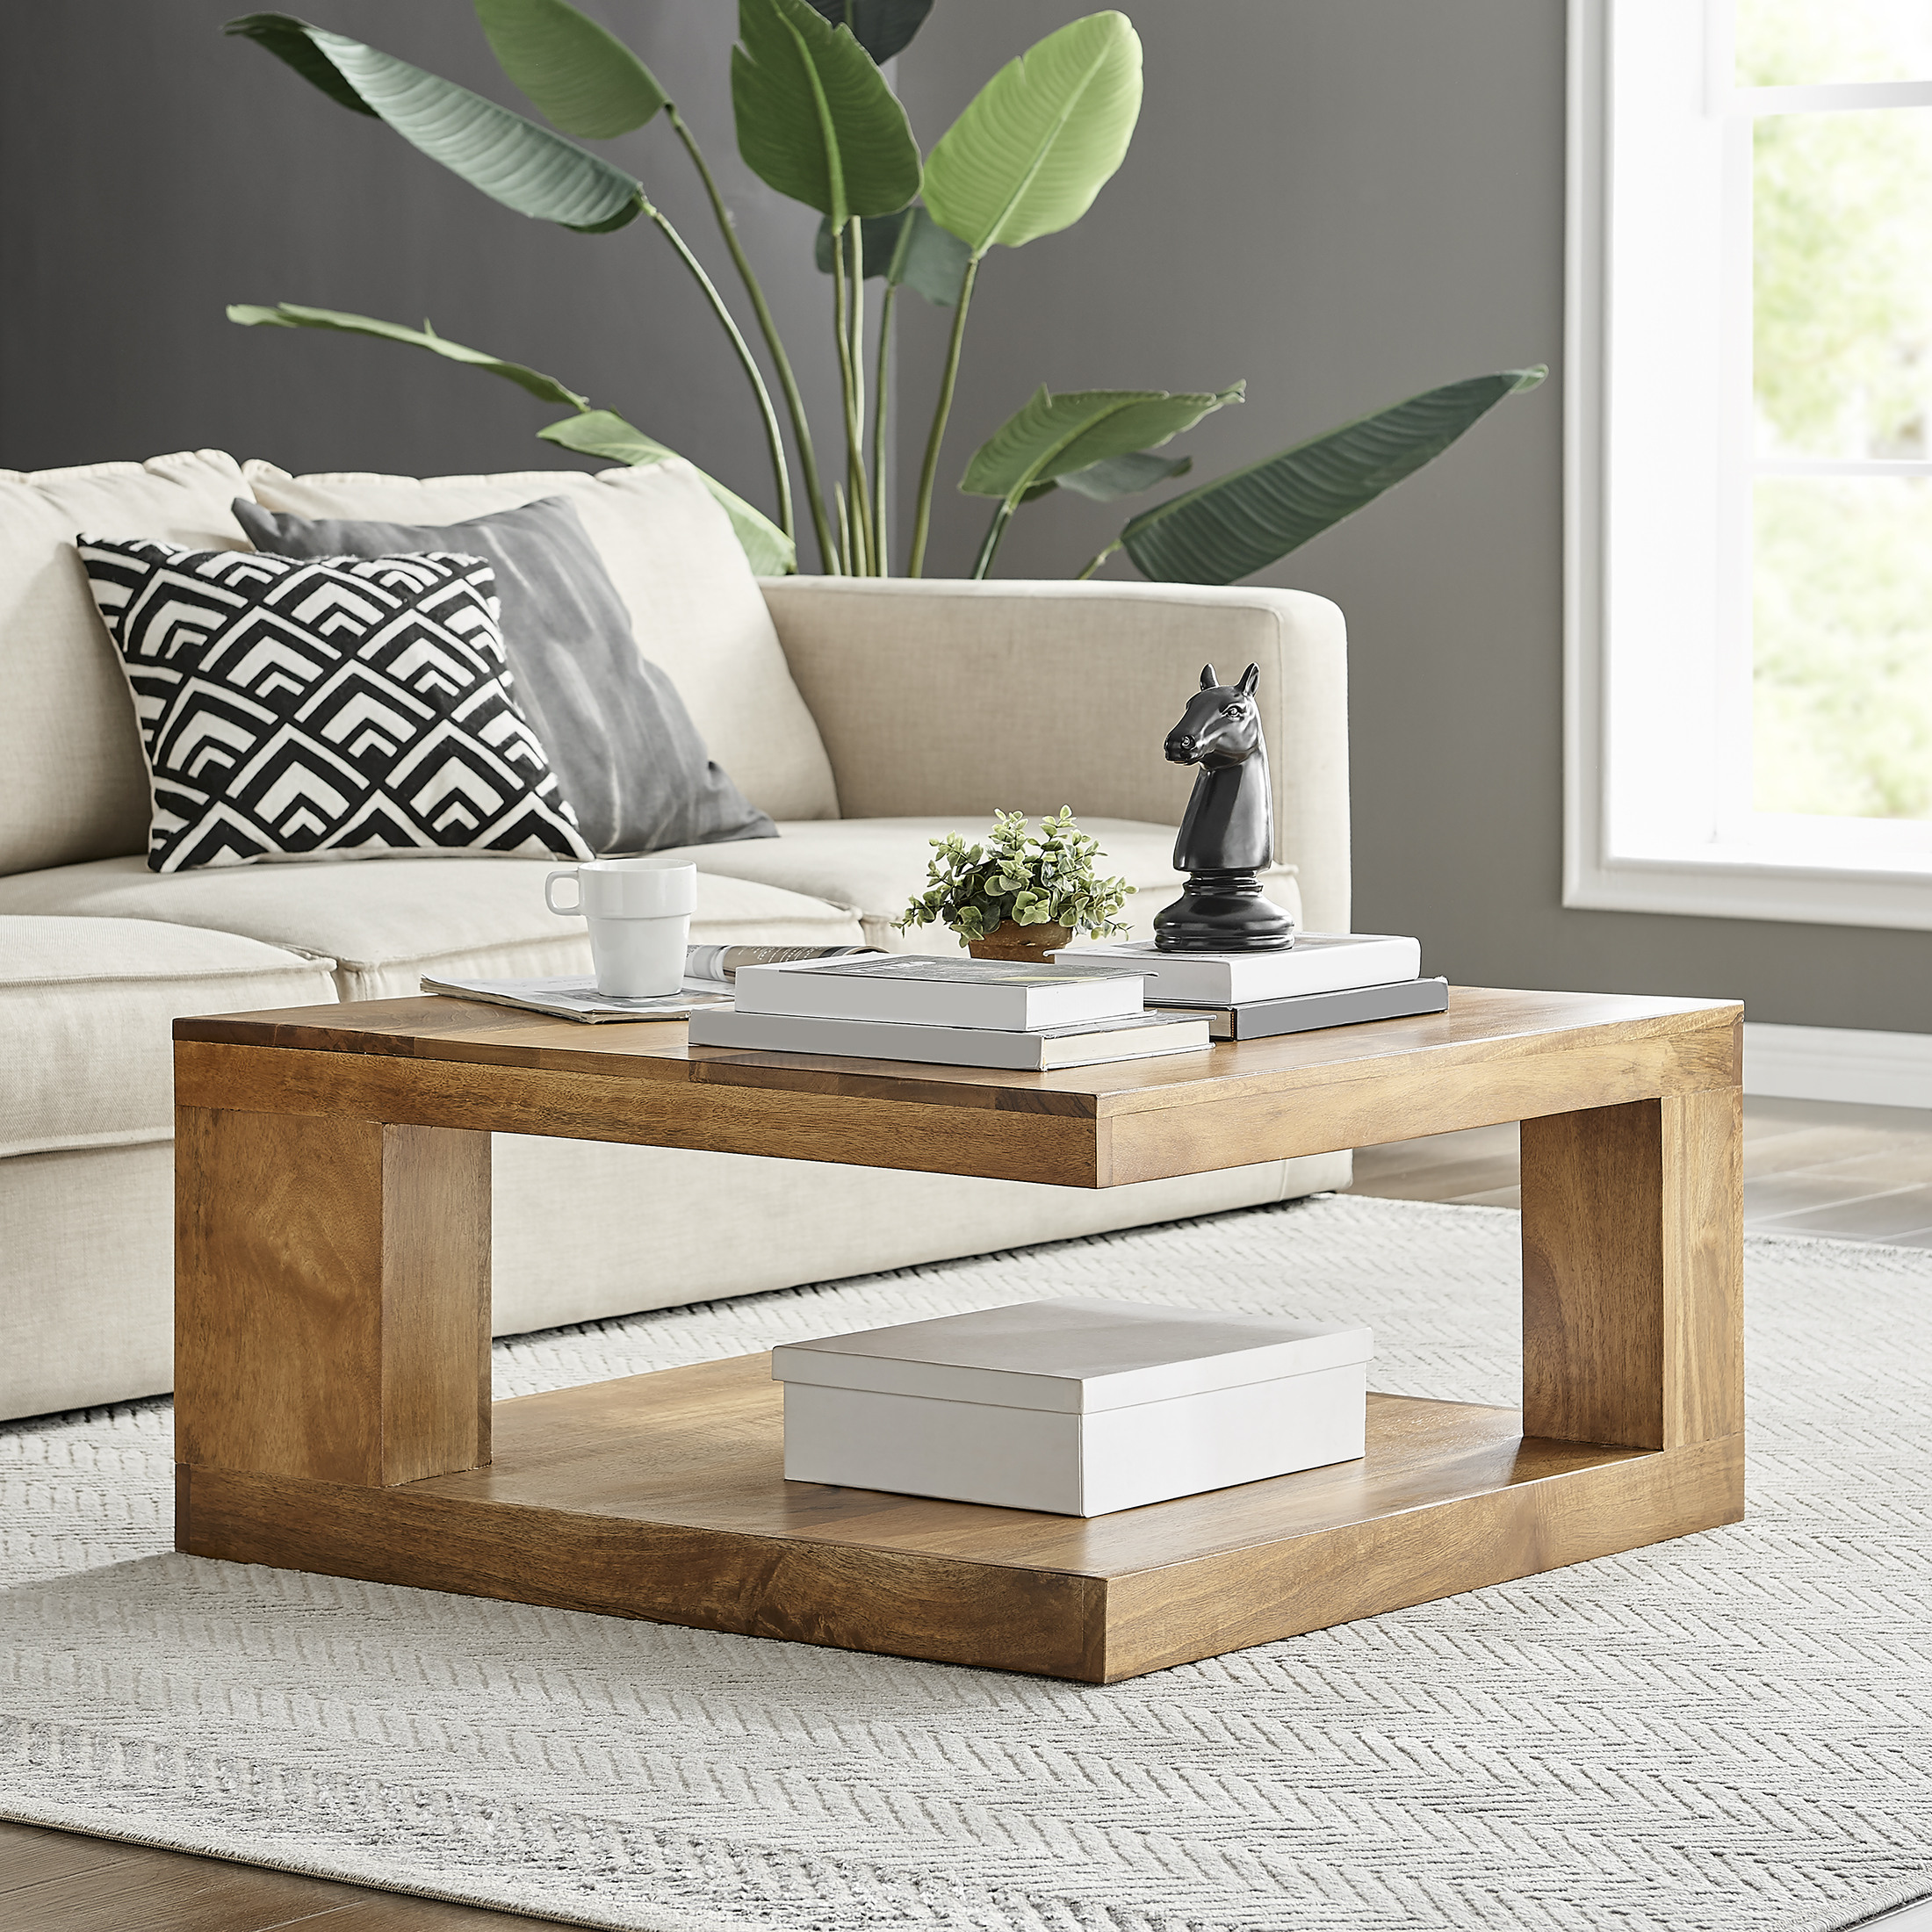 sutton-hoey-coffee-table-1